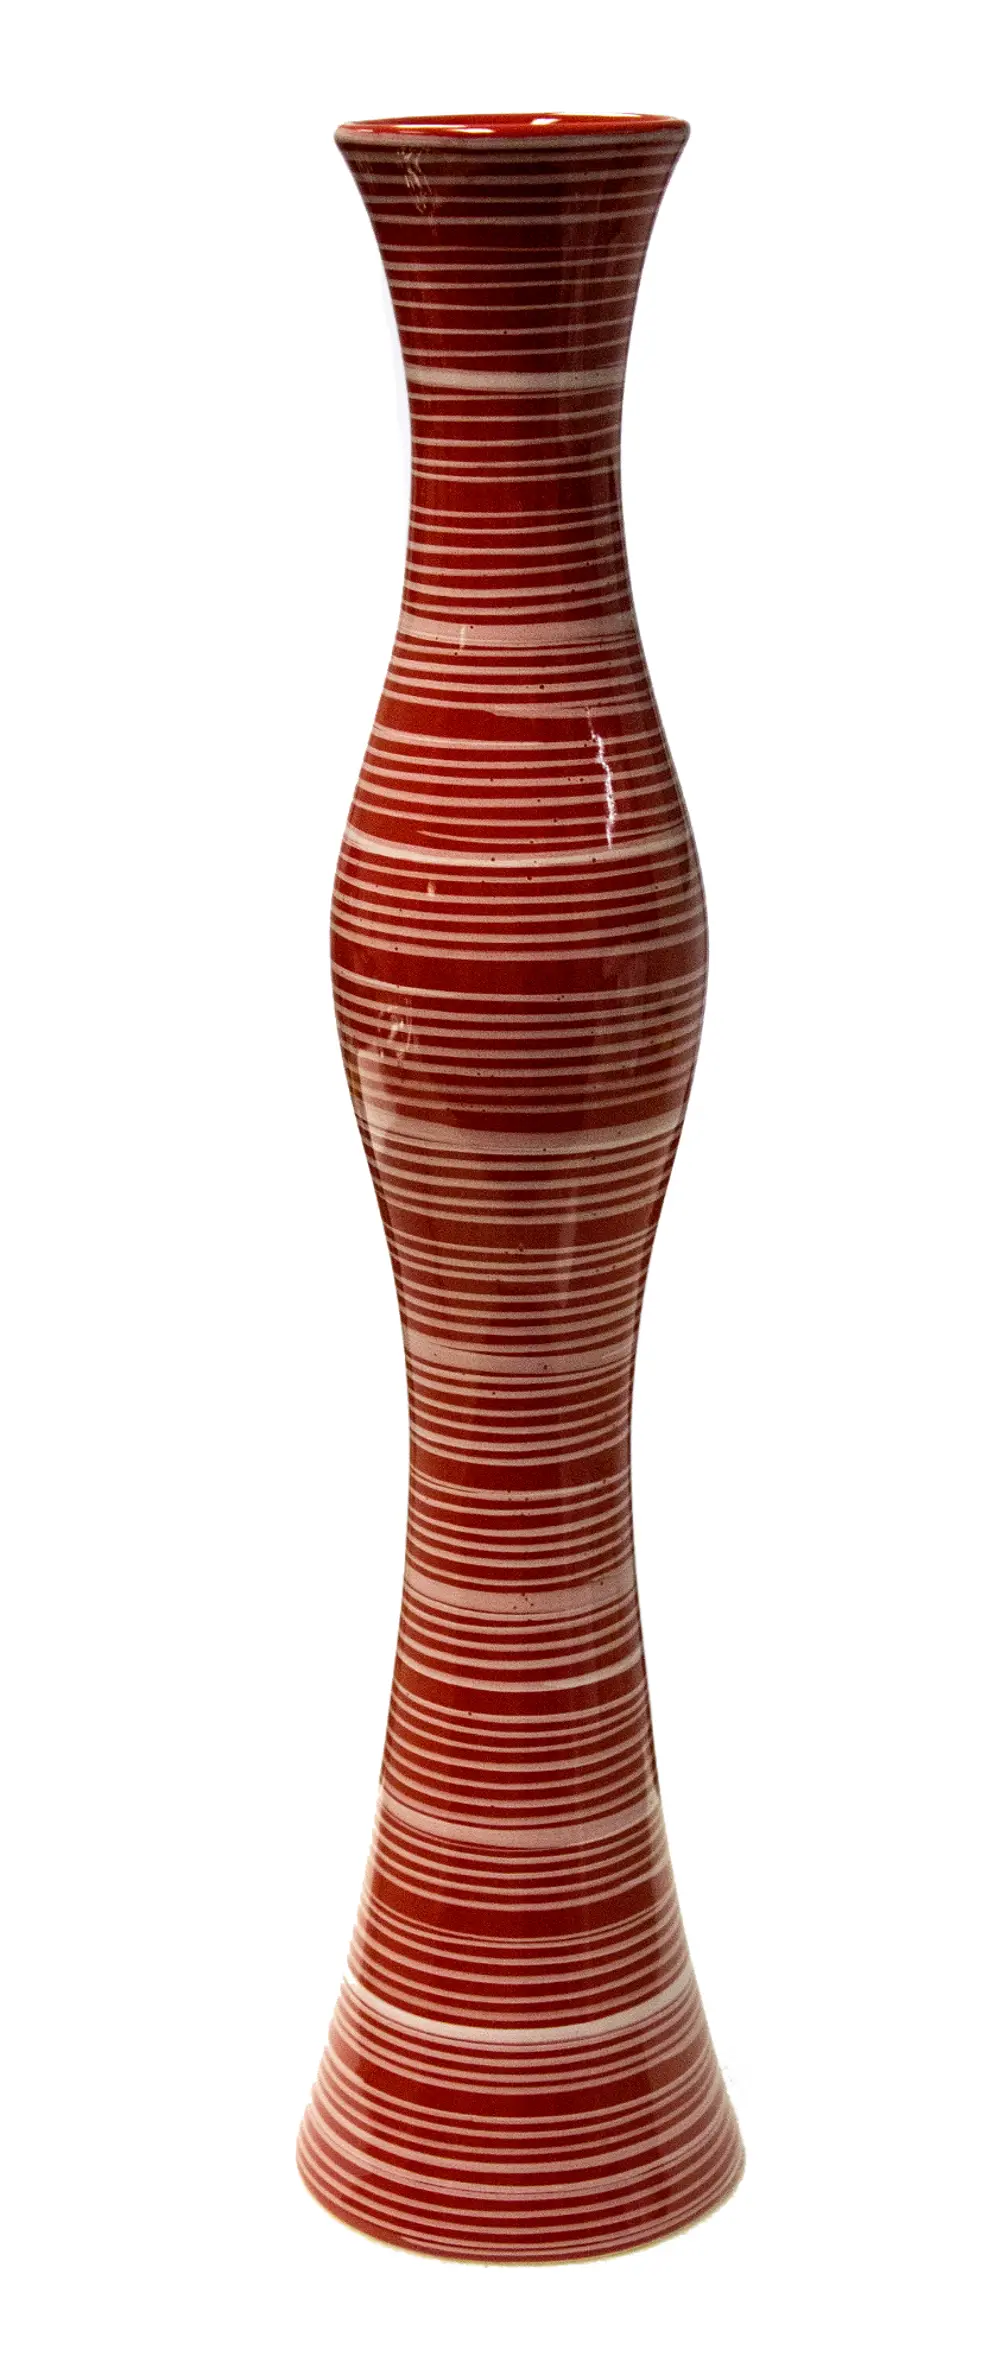 19 Inch Red and White Stripe Cylinder Vase-1